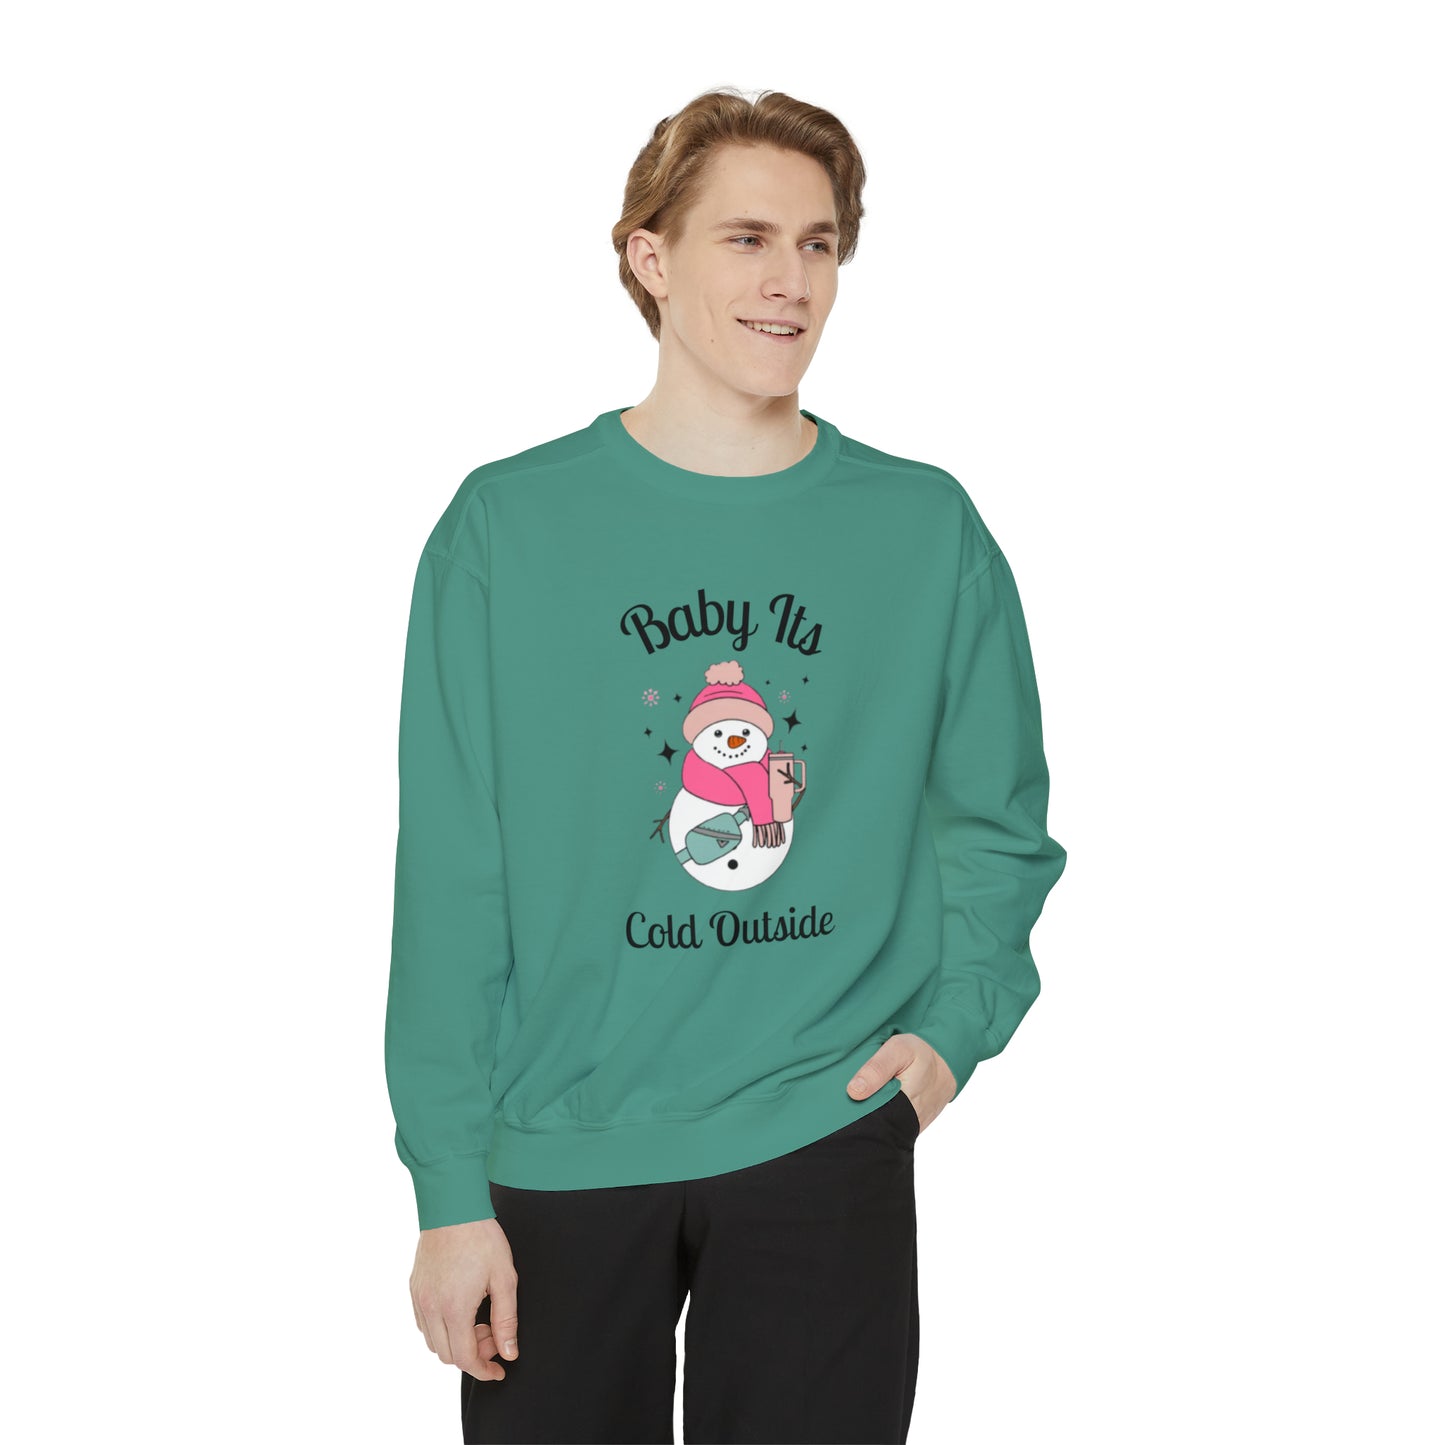 Baby Its Cold Outside Comfort Colors Unisex Garment-Dyed Sweatshirt